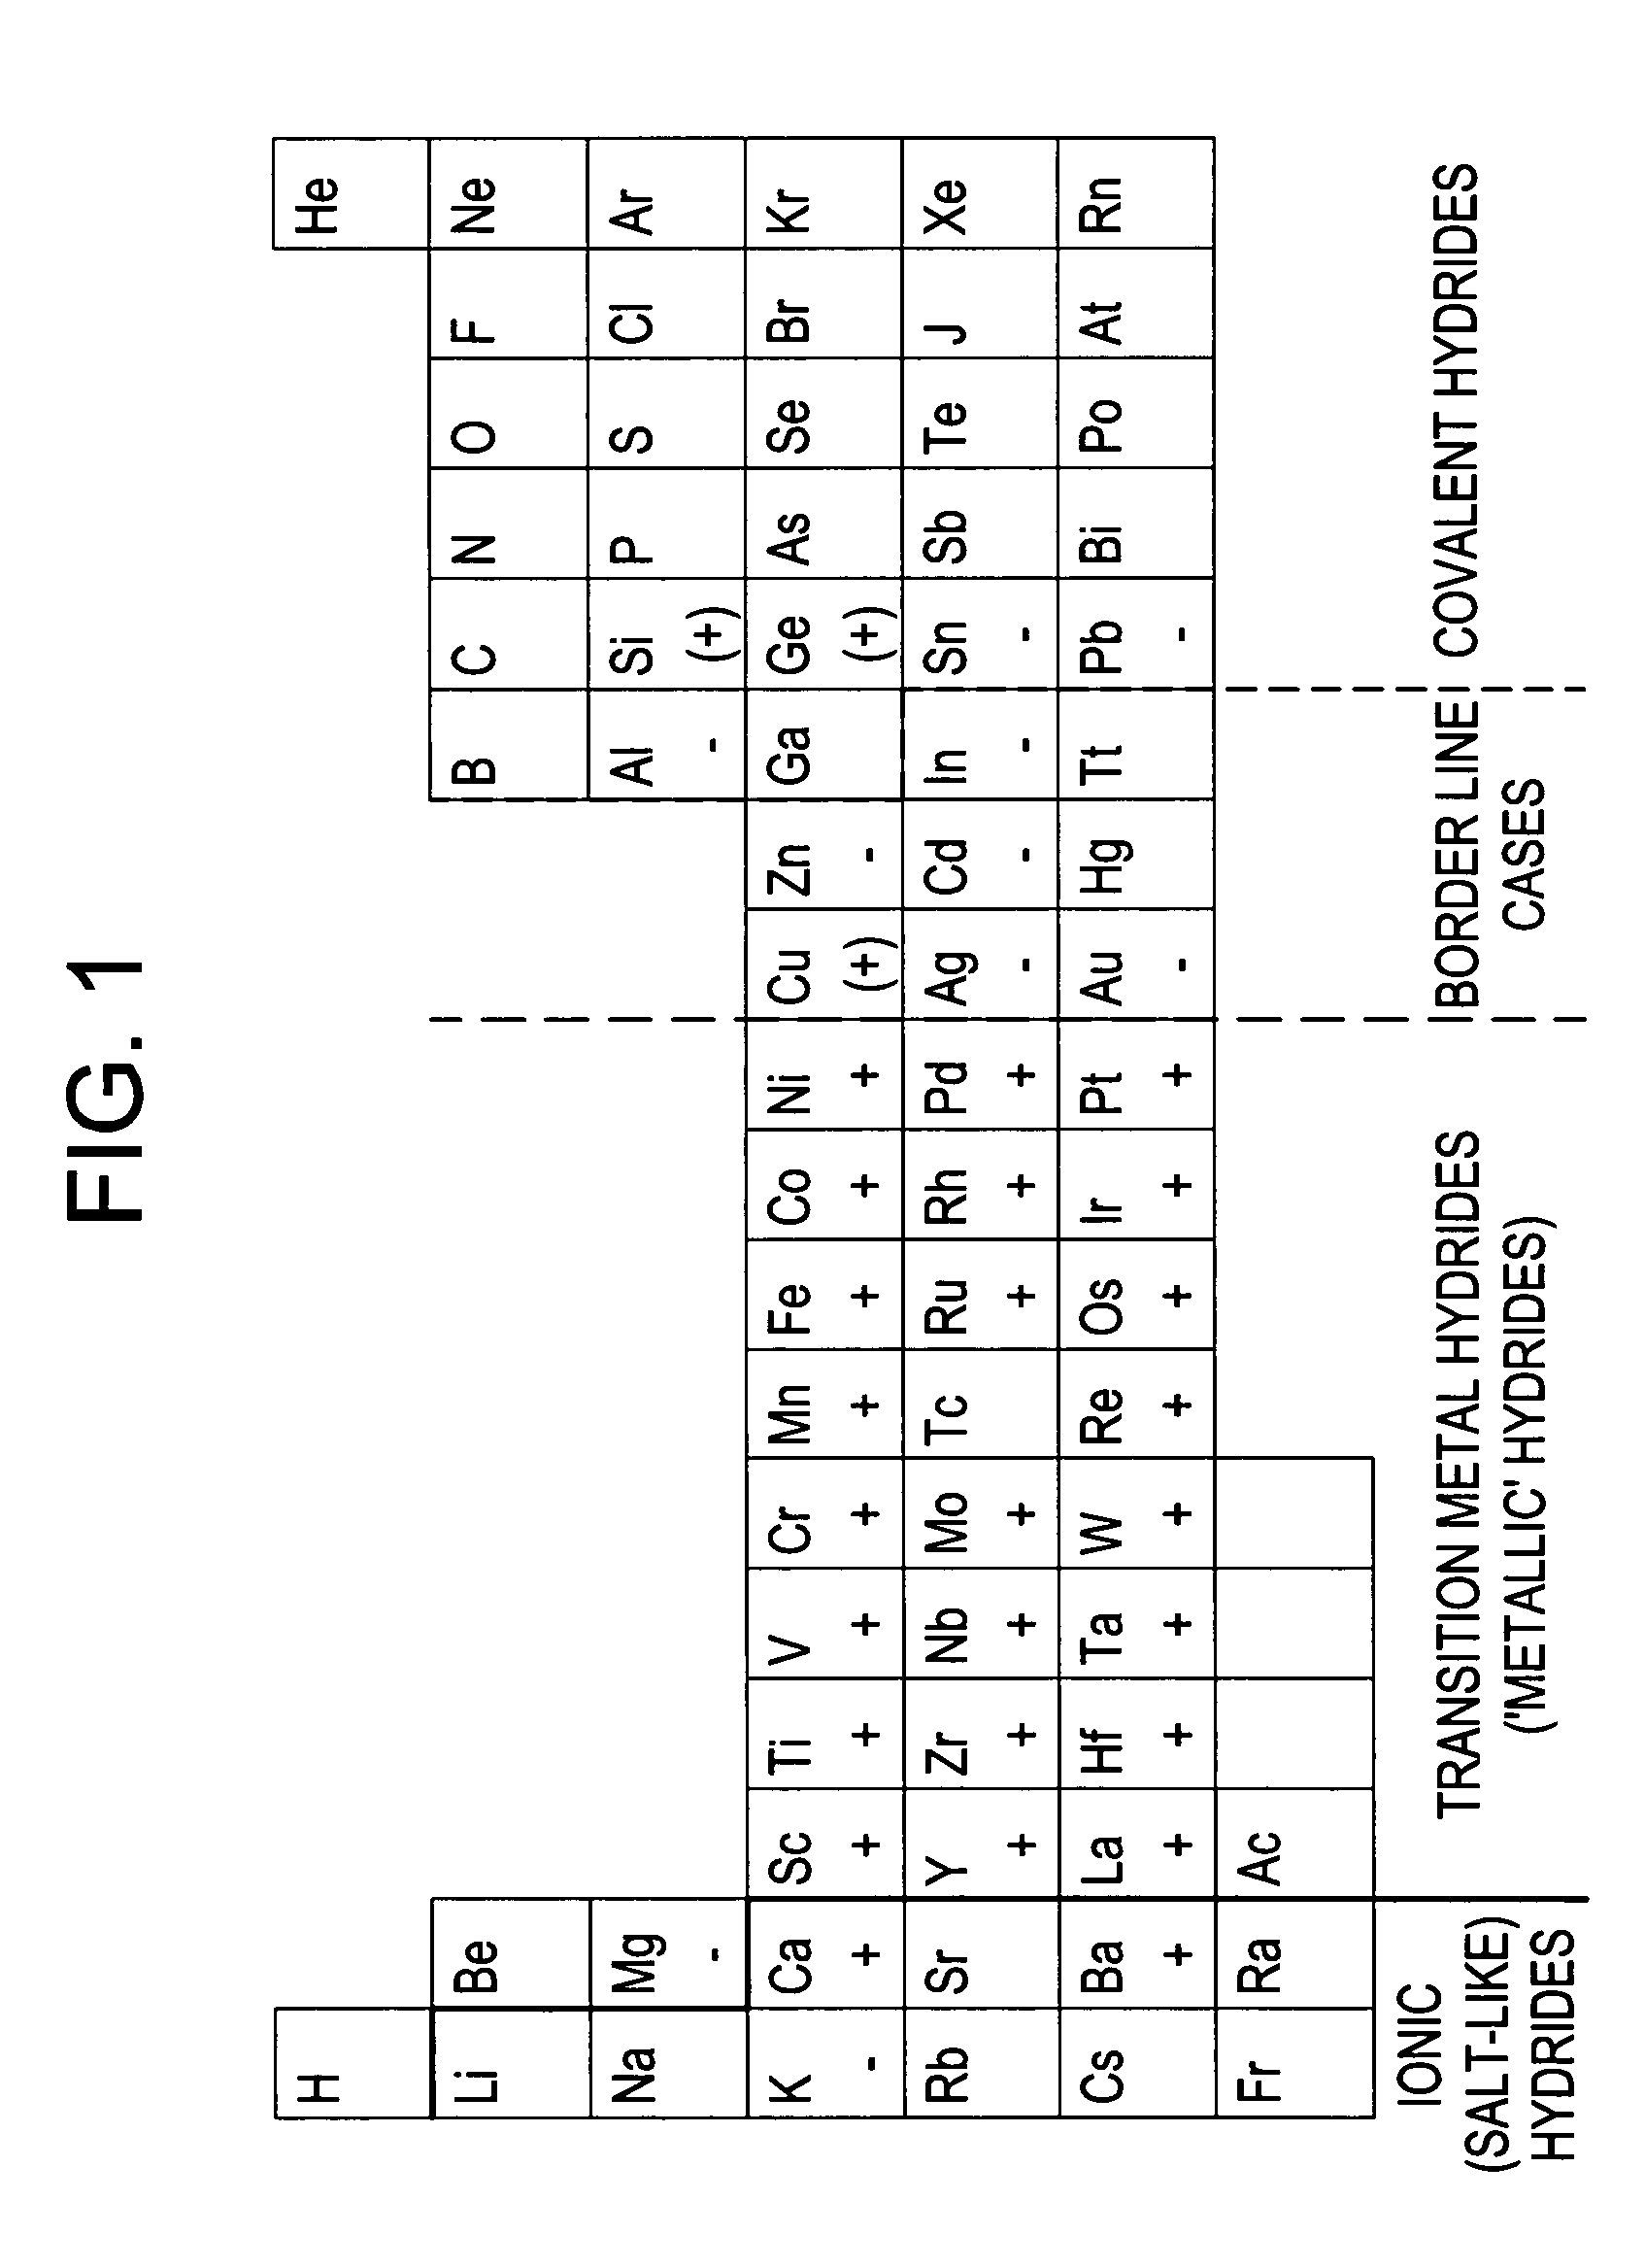 Compositions and methods for hydrogen storage and recovery